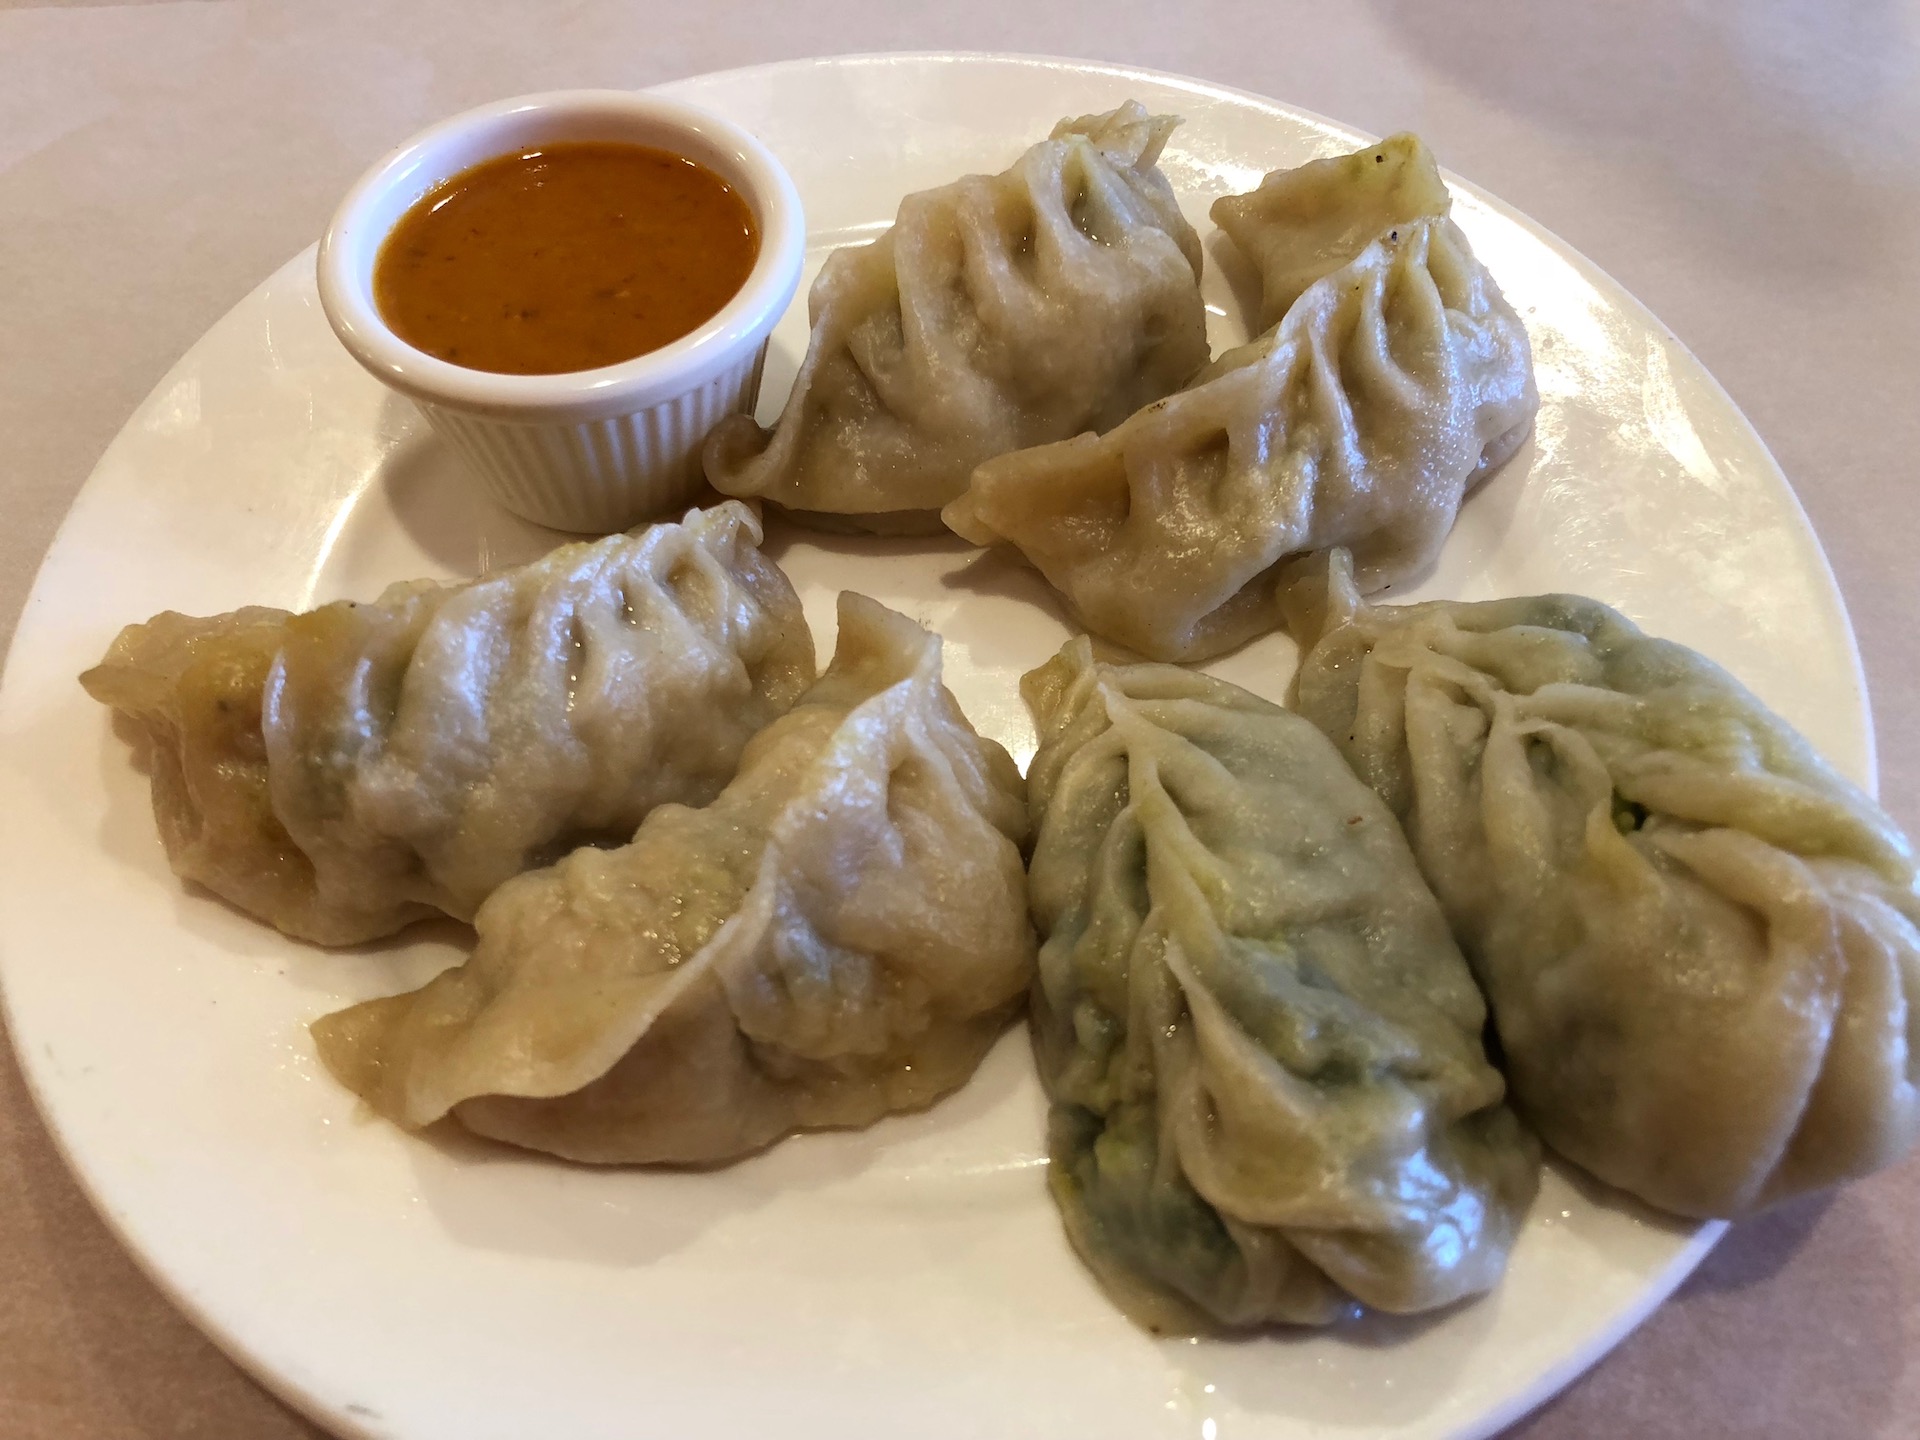 Cuisine of Nepal’s excellent momos come six to an order